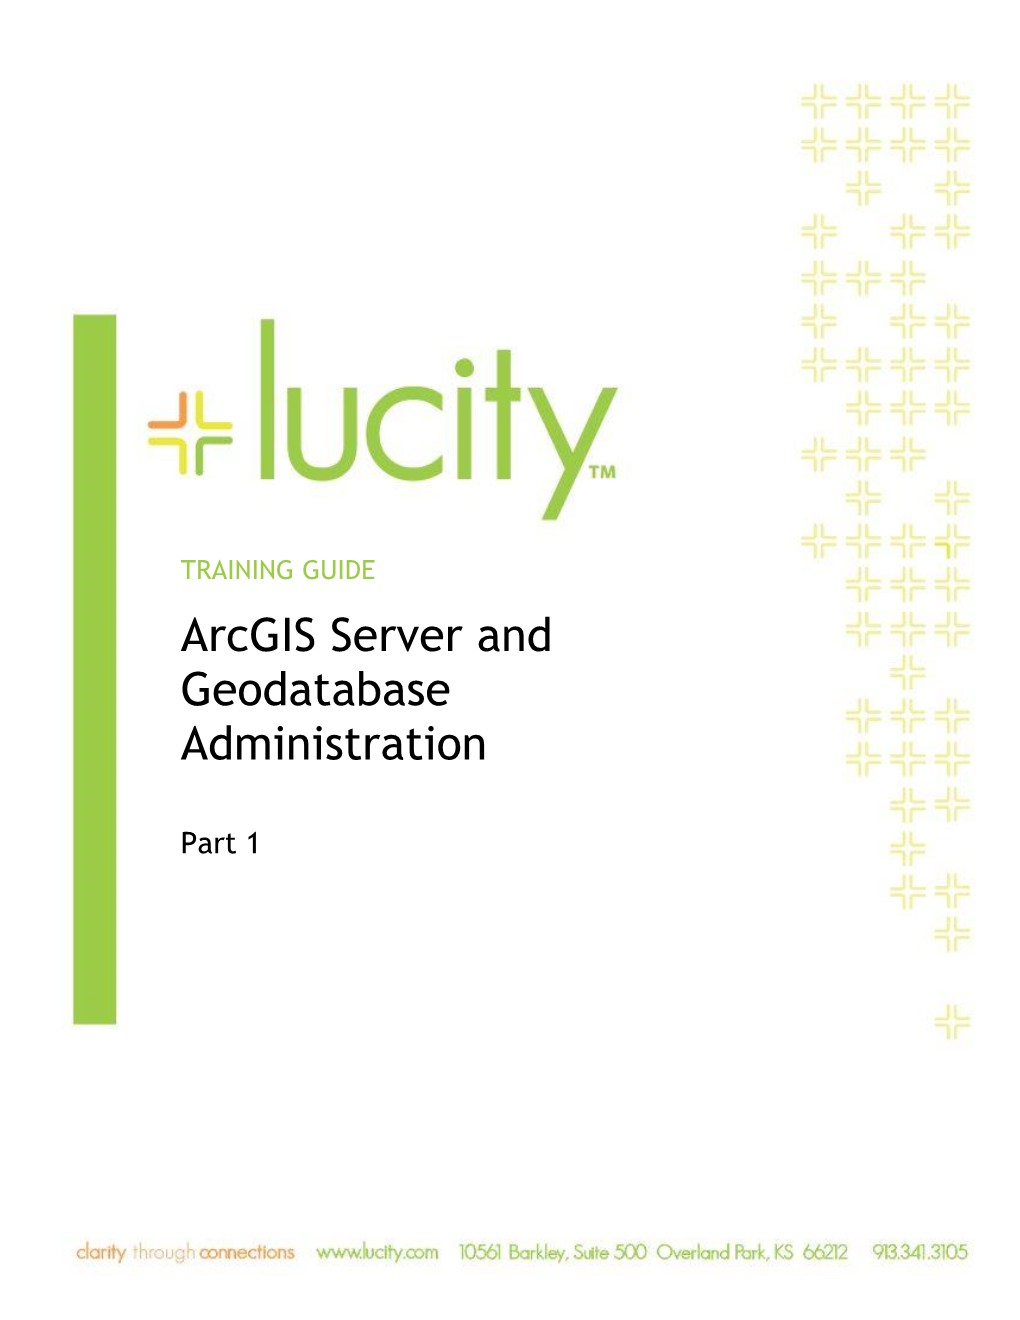 Arcgis Server and Geodatabase Administration